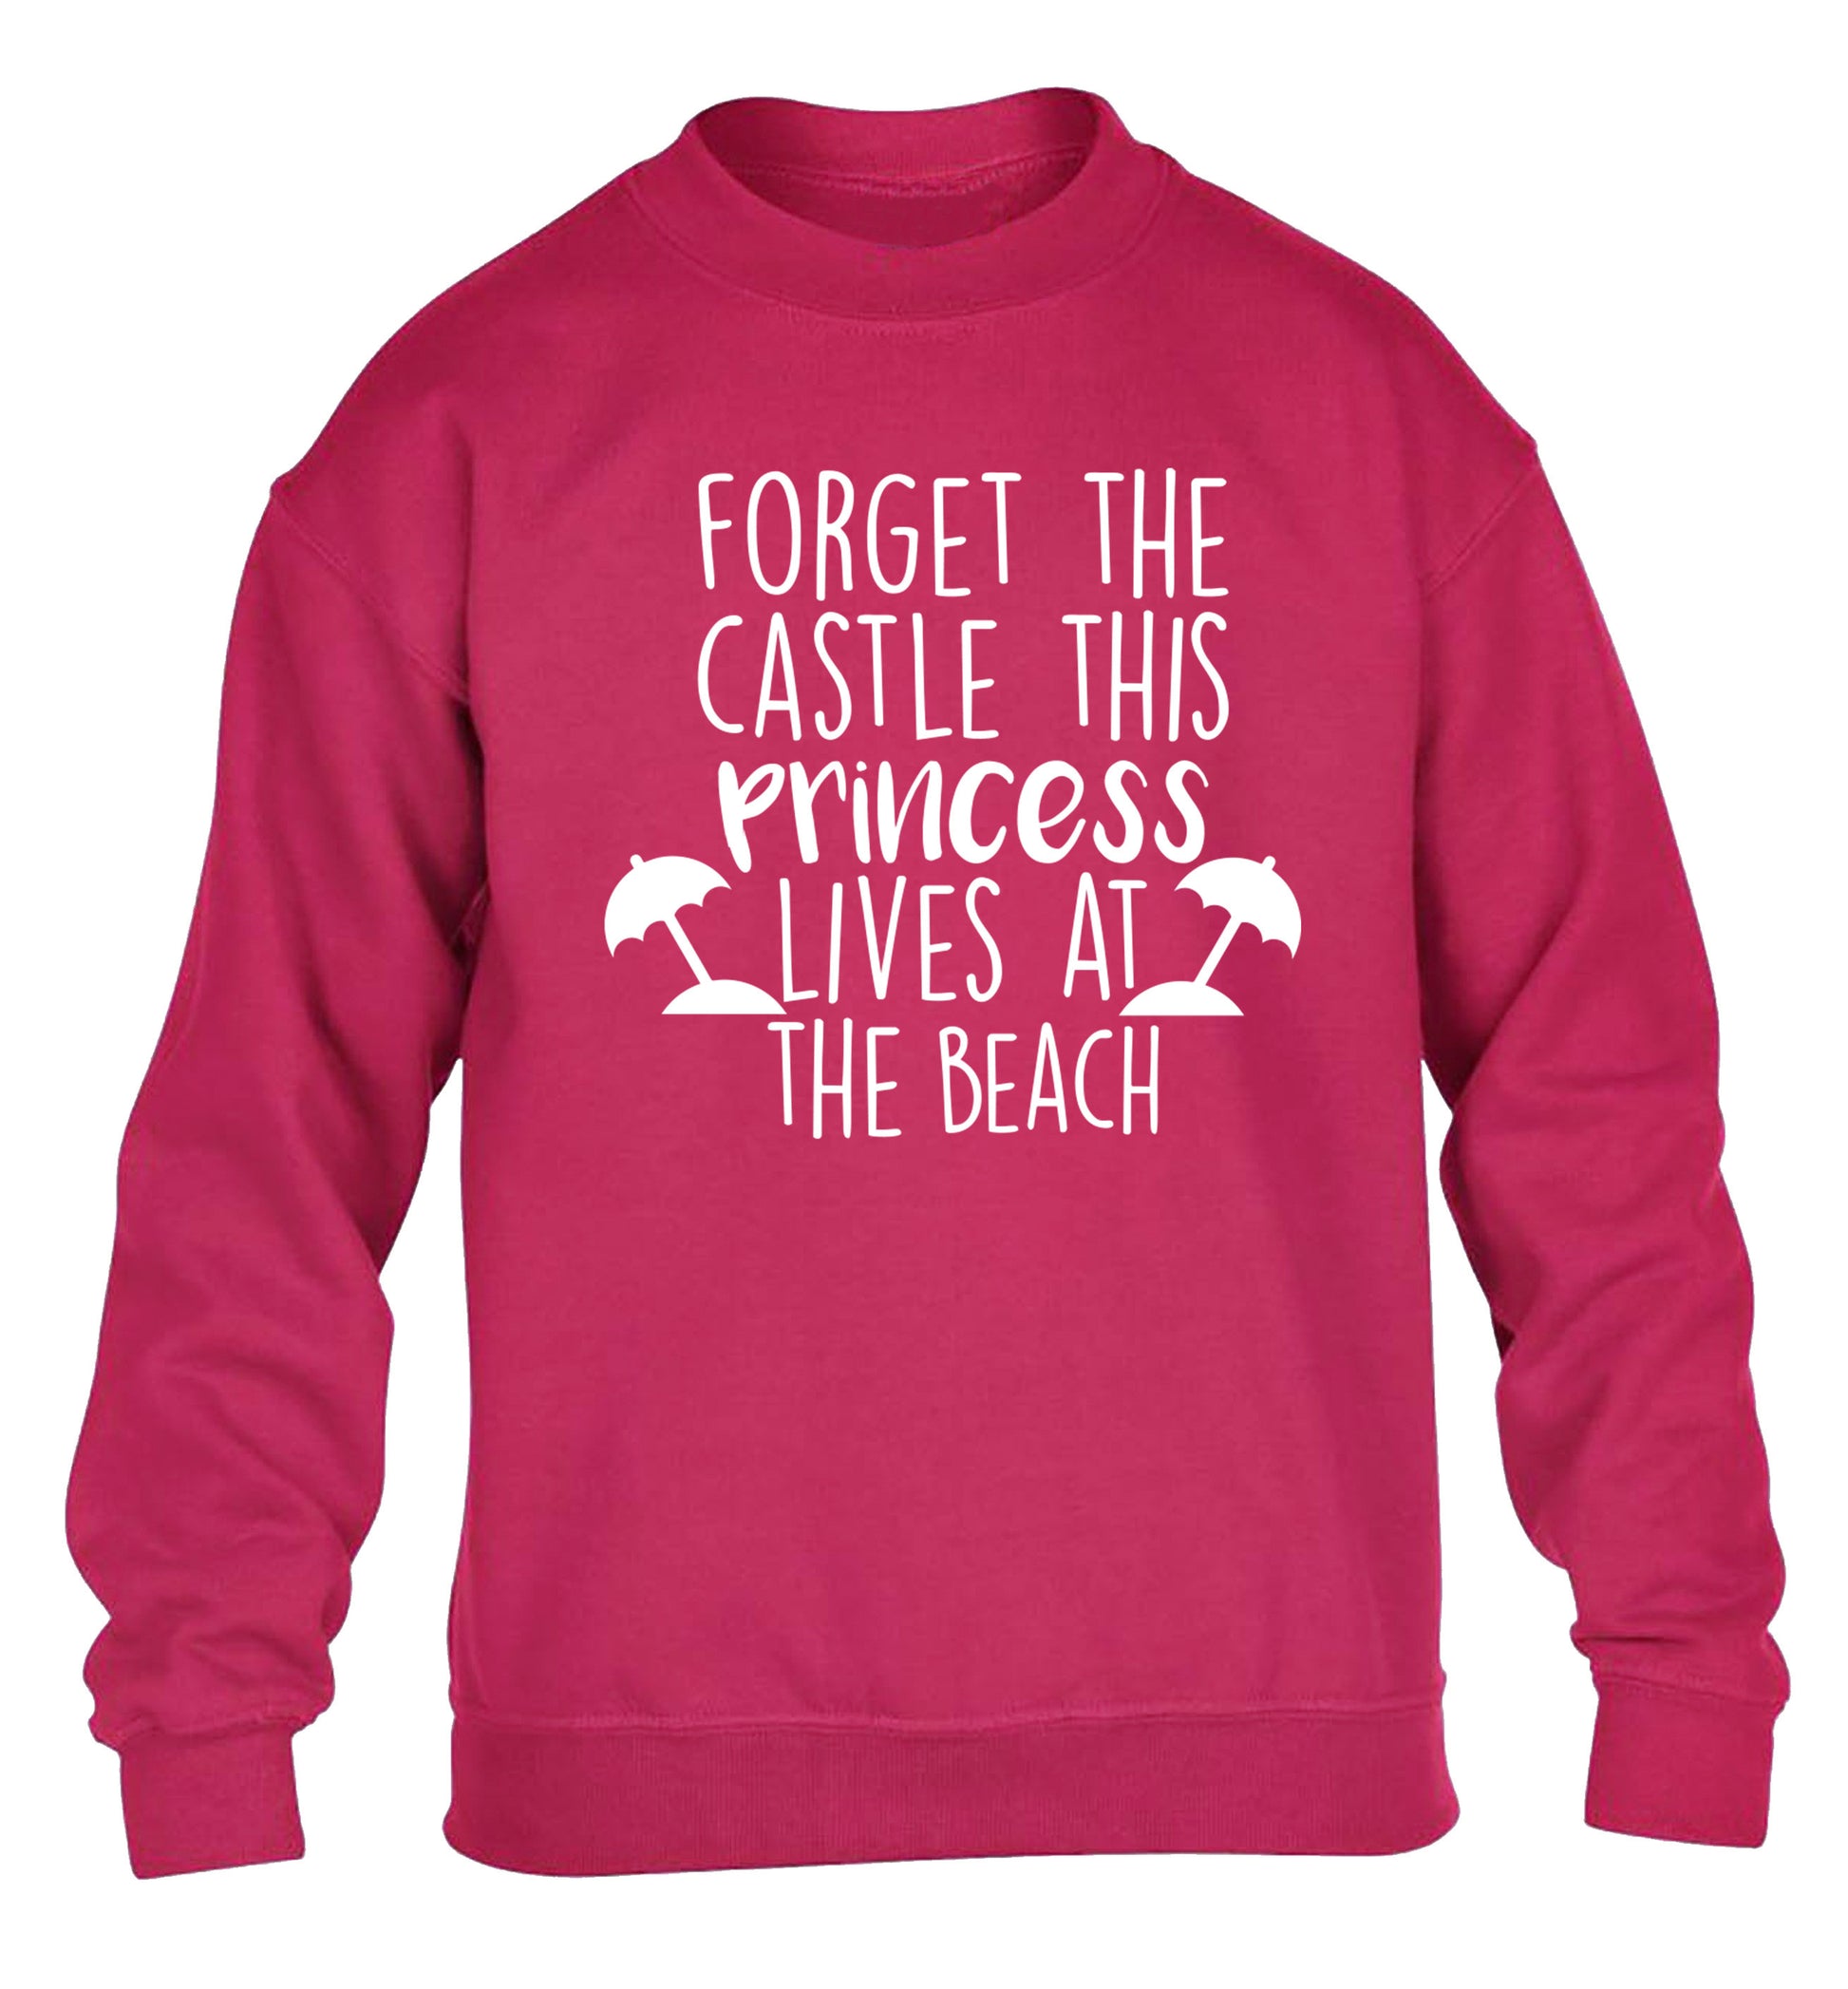 Forget the castle this princess lives at the beach children's pink sweater 12-14 Years